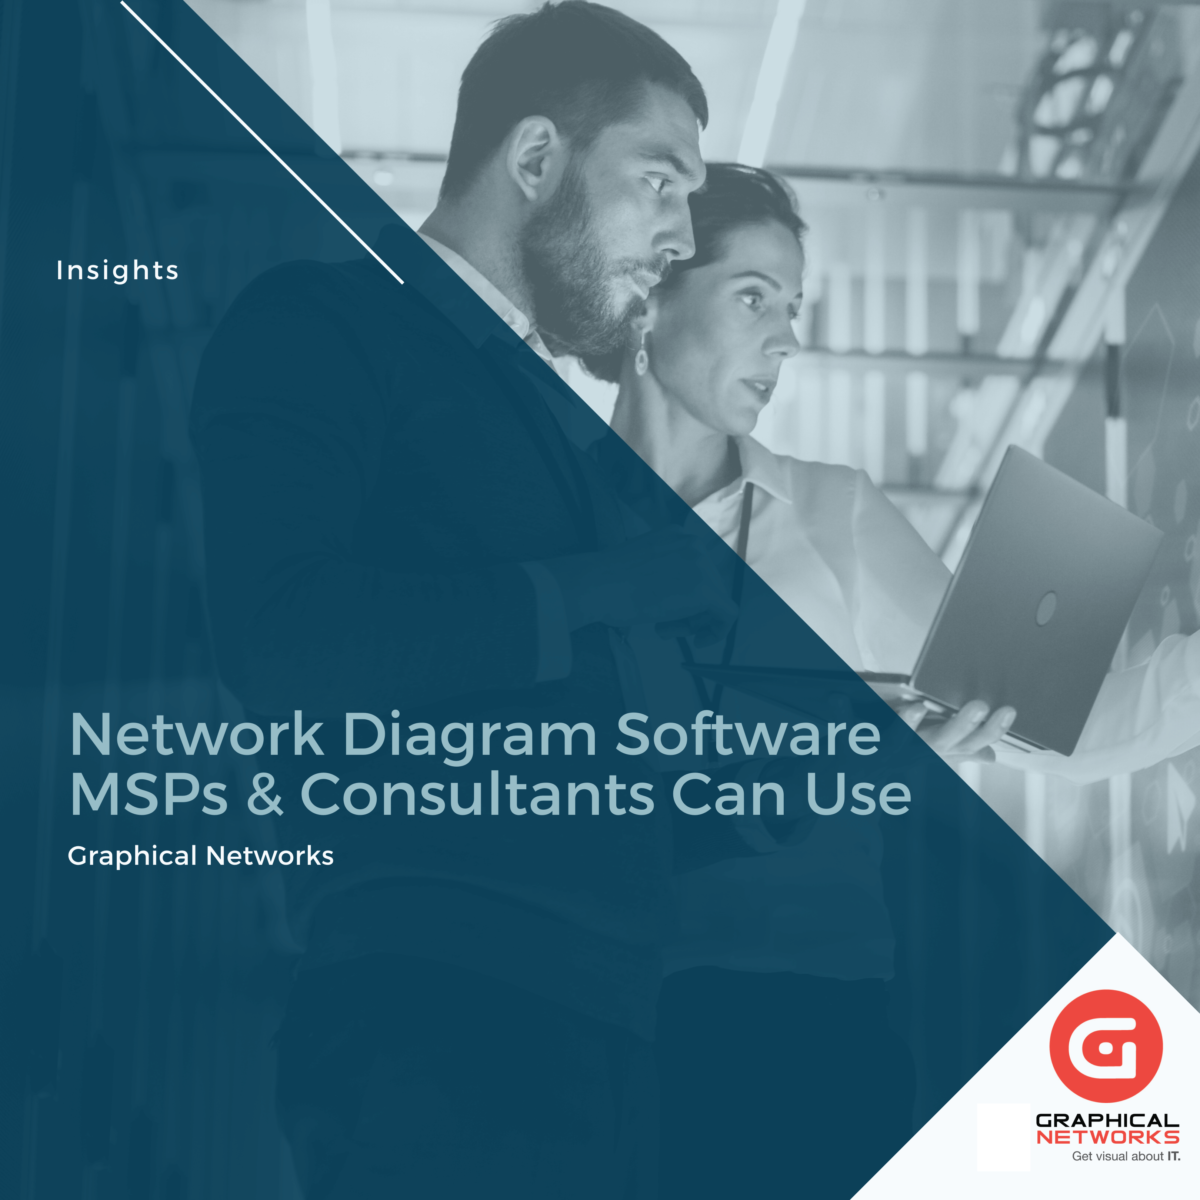 Network Diagram Software MSPs and Network Consultants Can Use